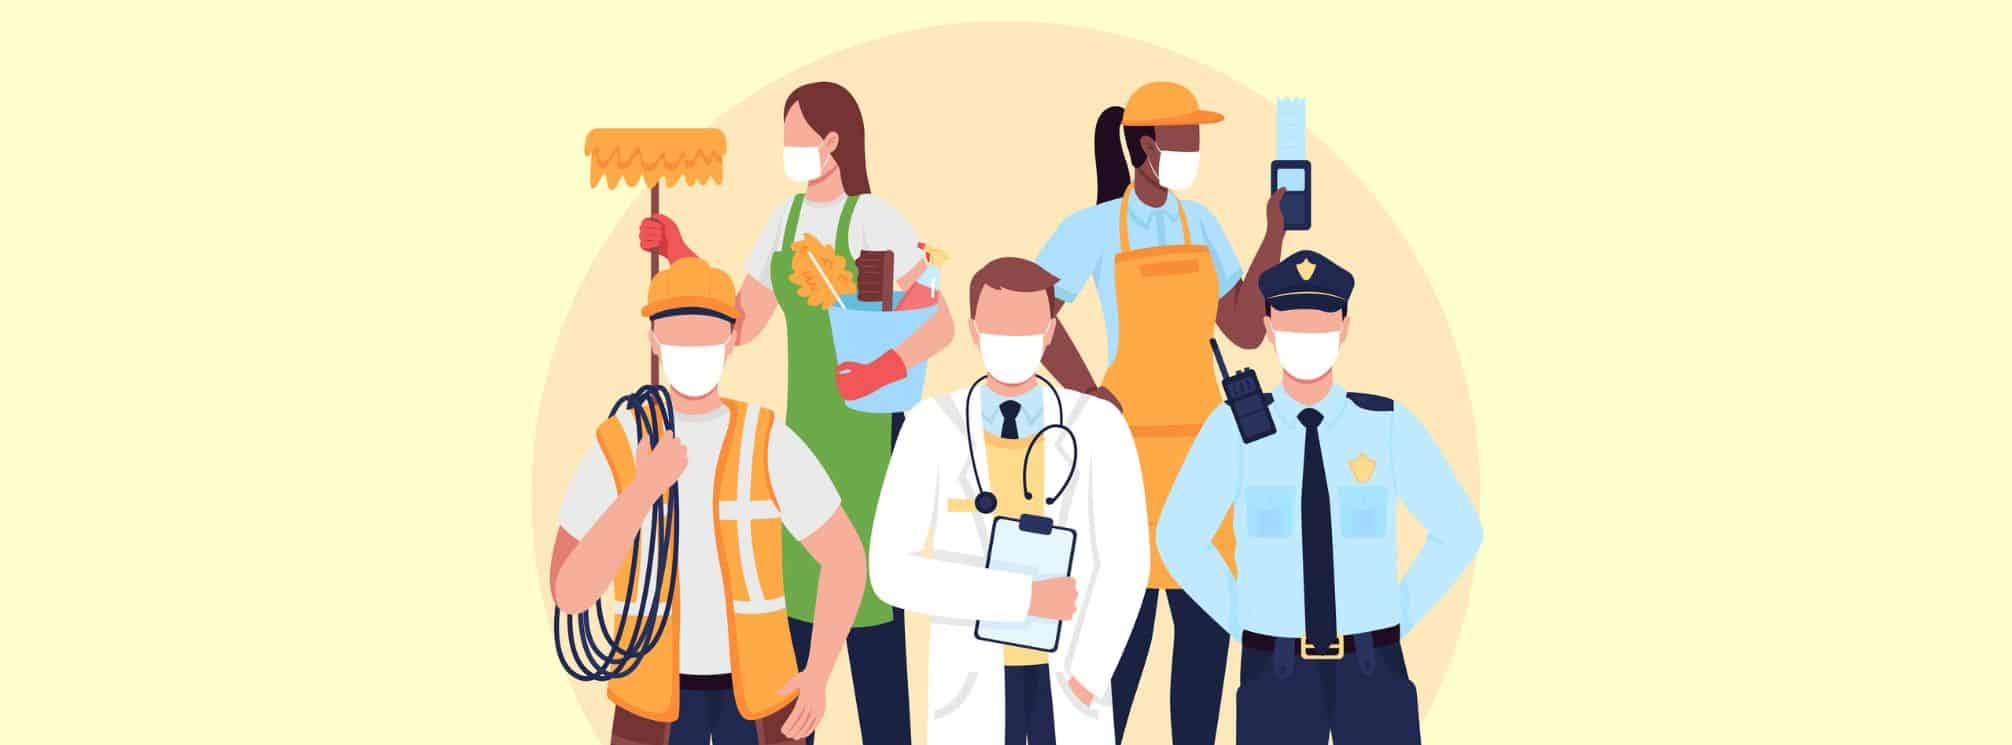 flat are illustration showing examples of frontline workers including first responders and doctors